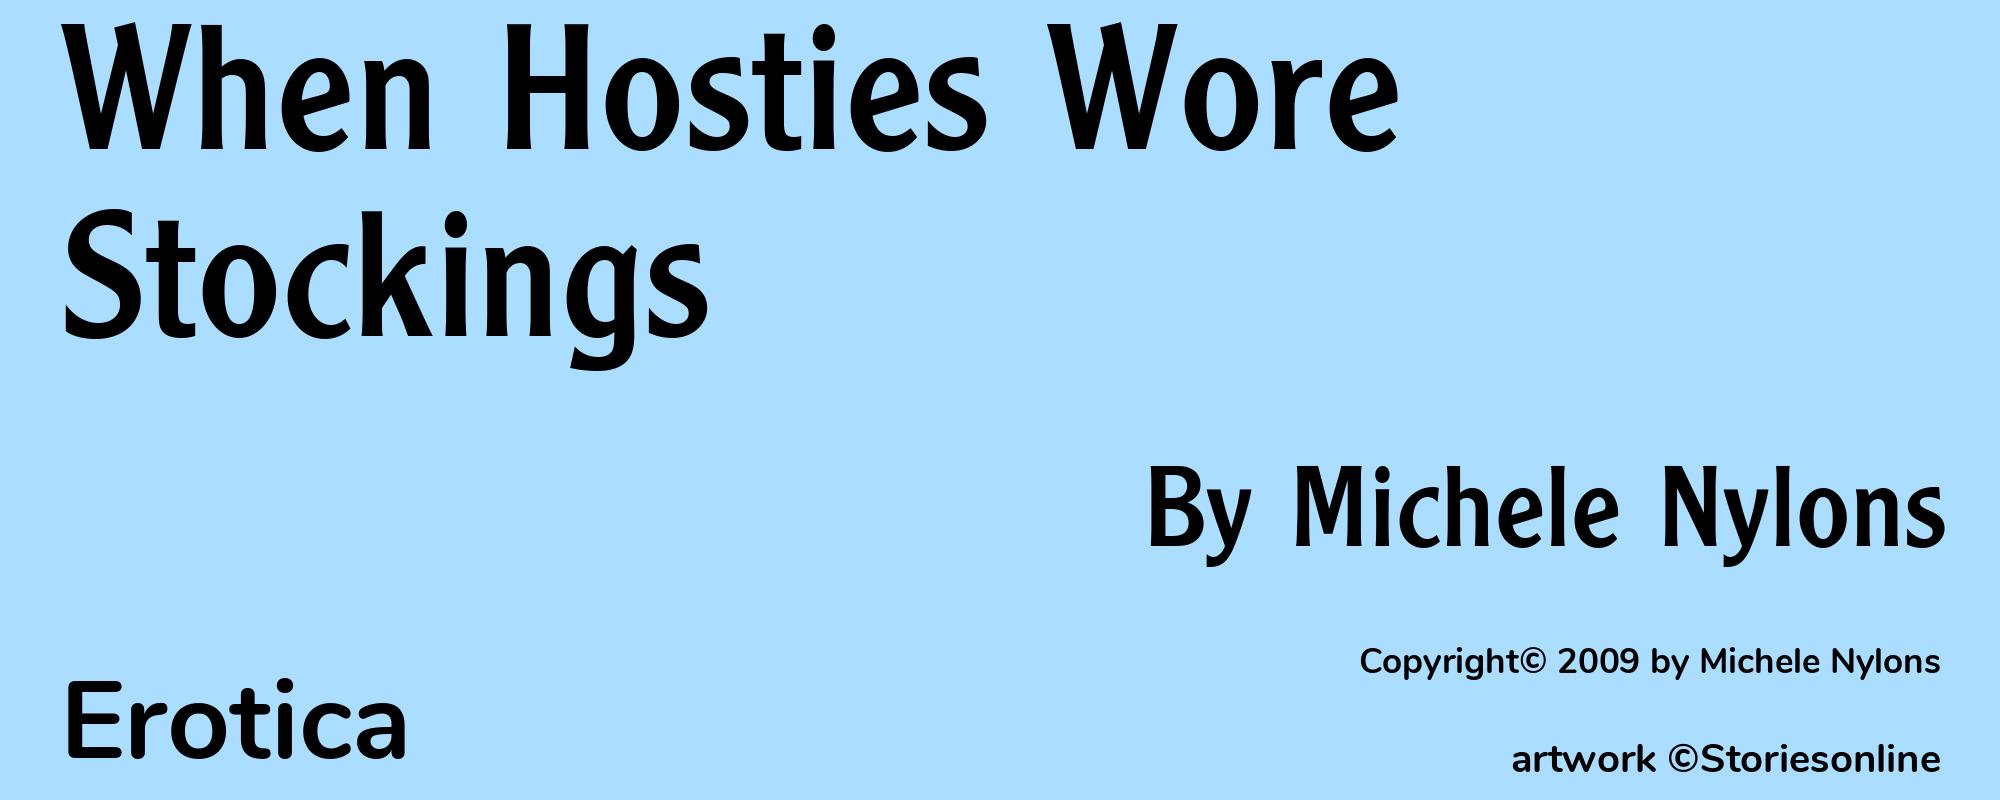 When Hosties Wore Stockings - Cover